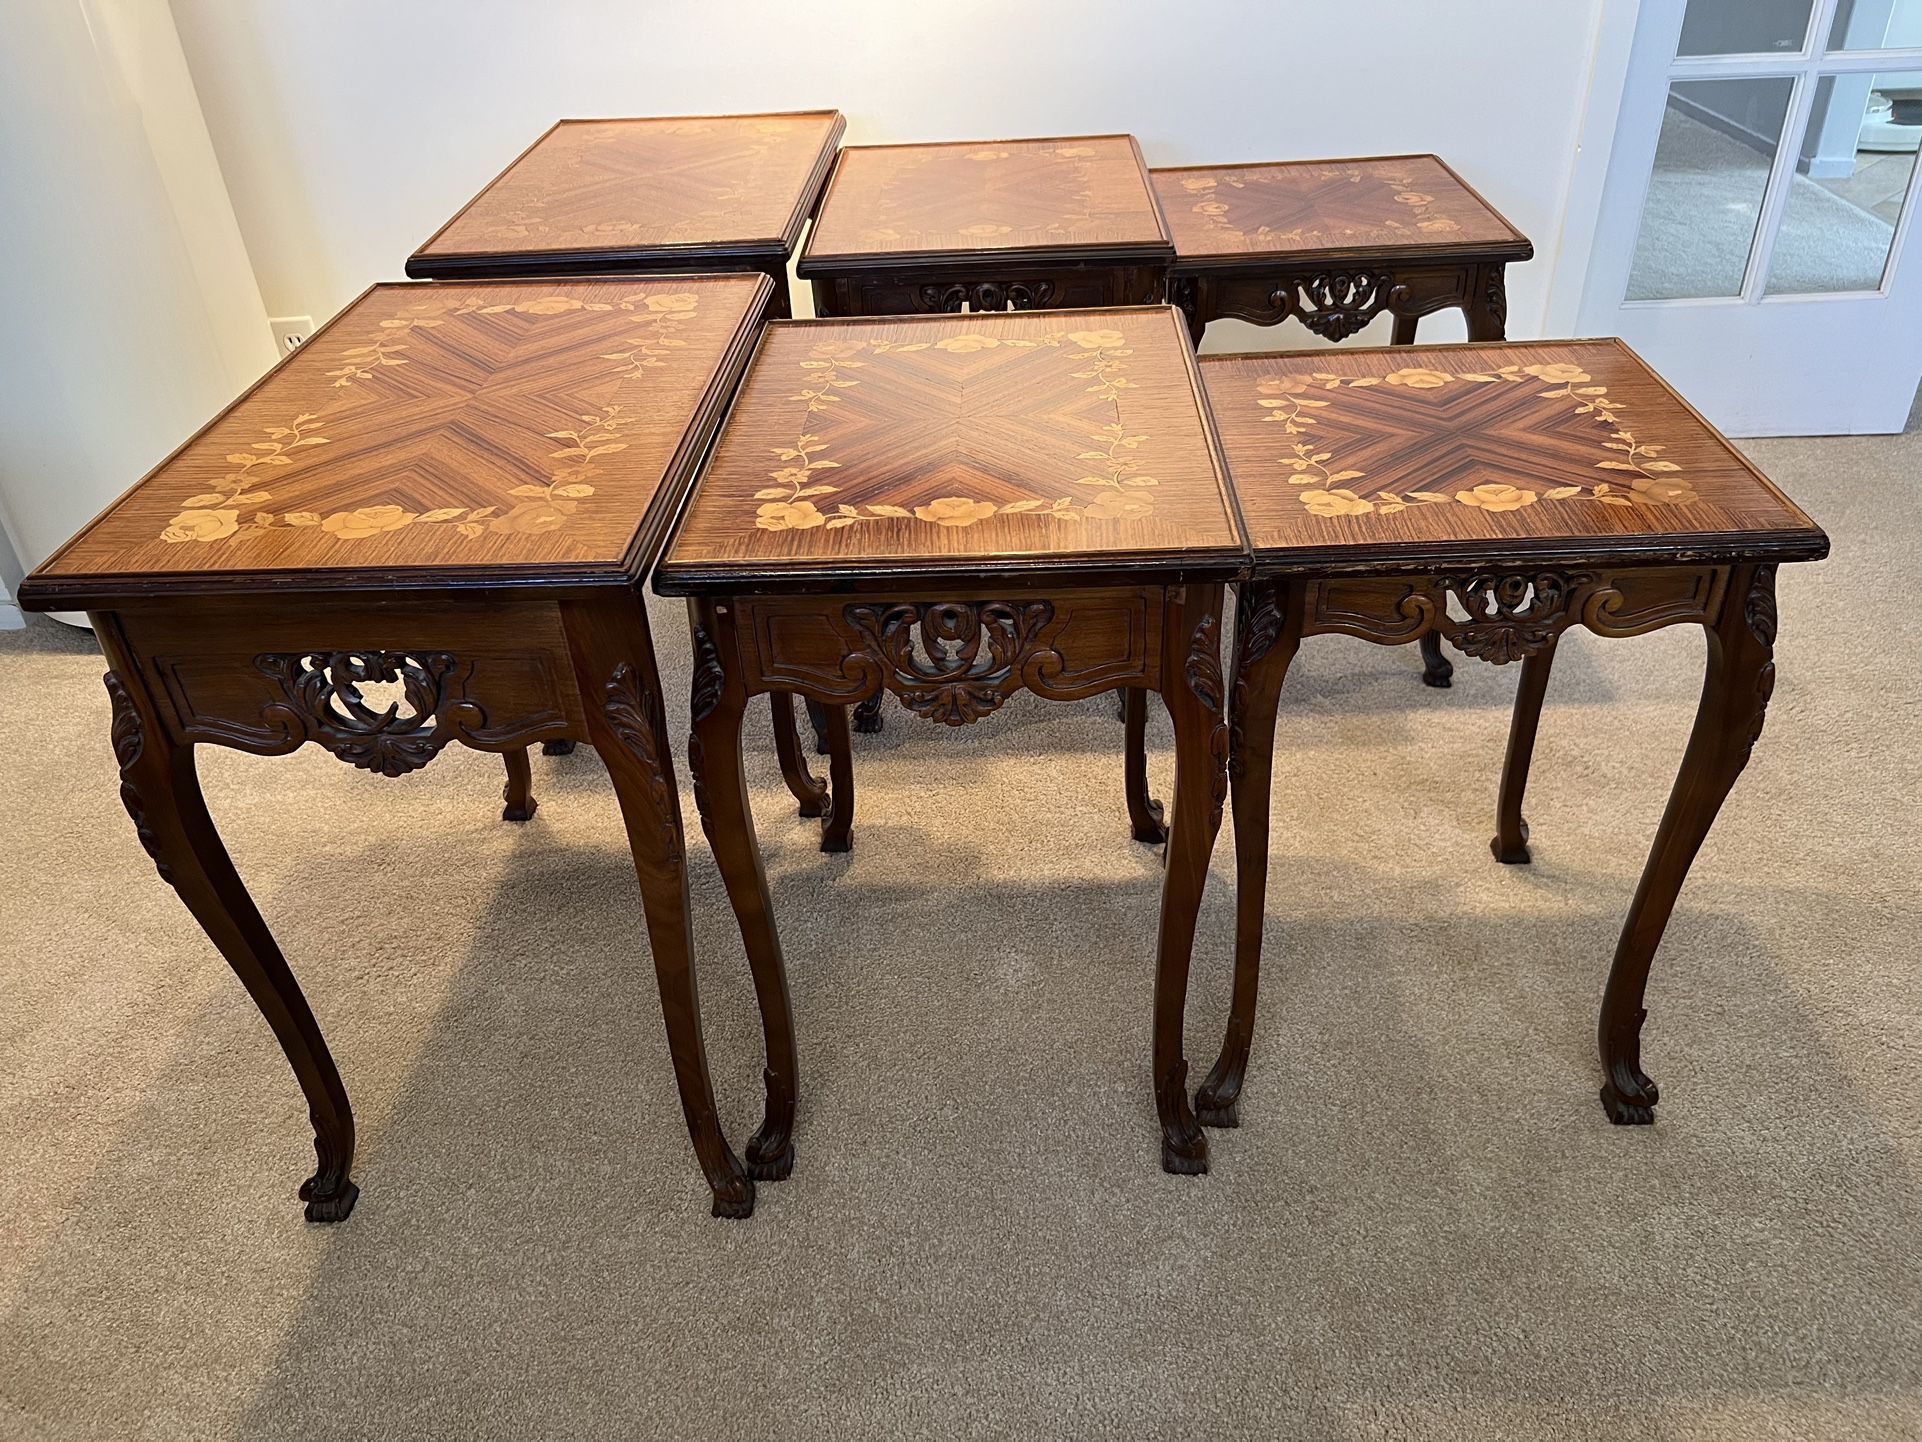 Antique Nesting Tables (2 Sets of 3 Tables. EACH Set PRICED and Sold Separately). 